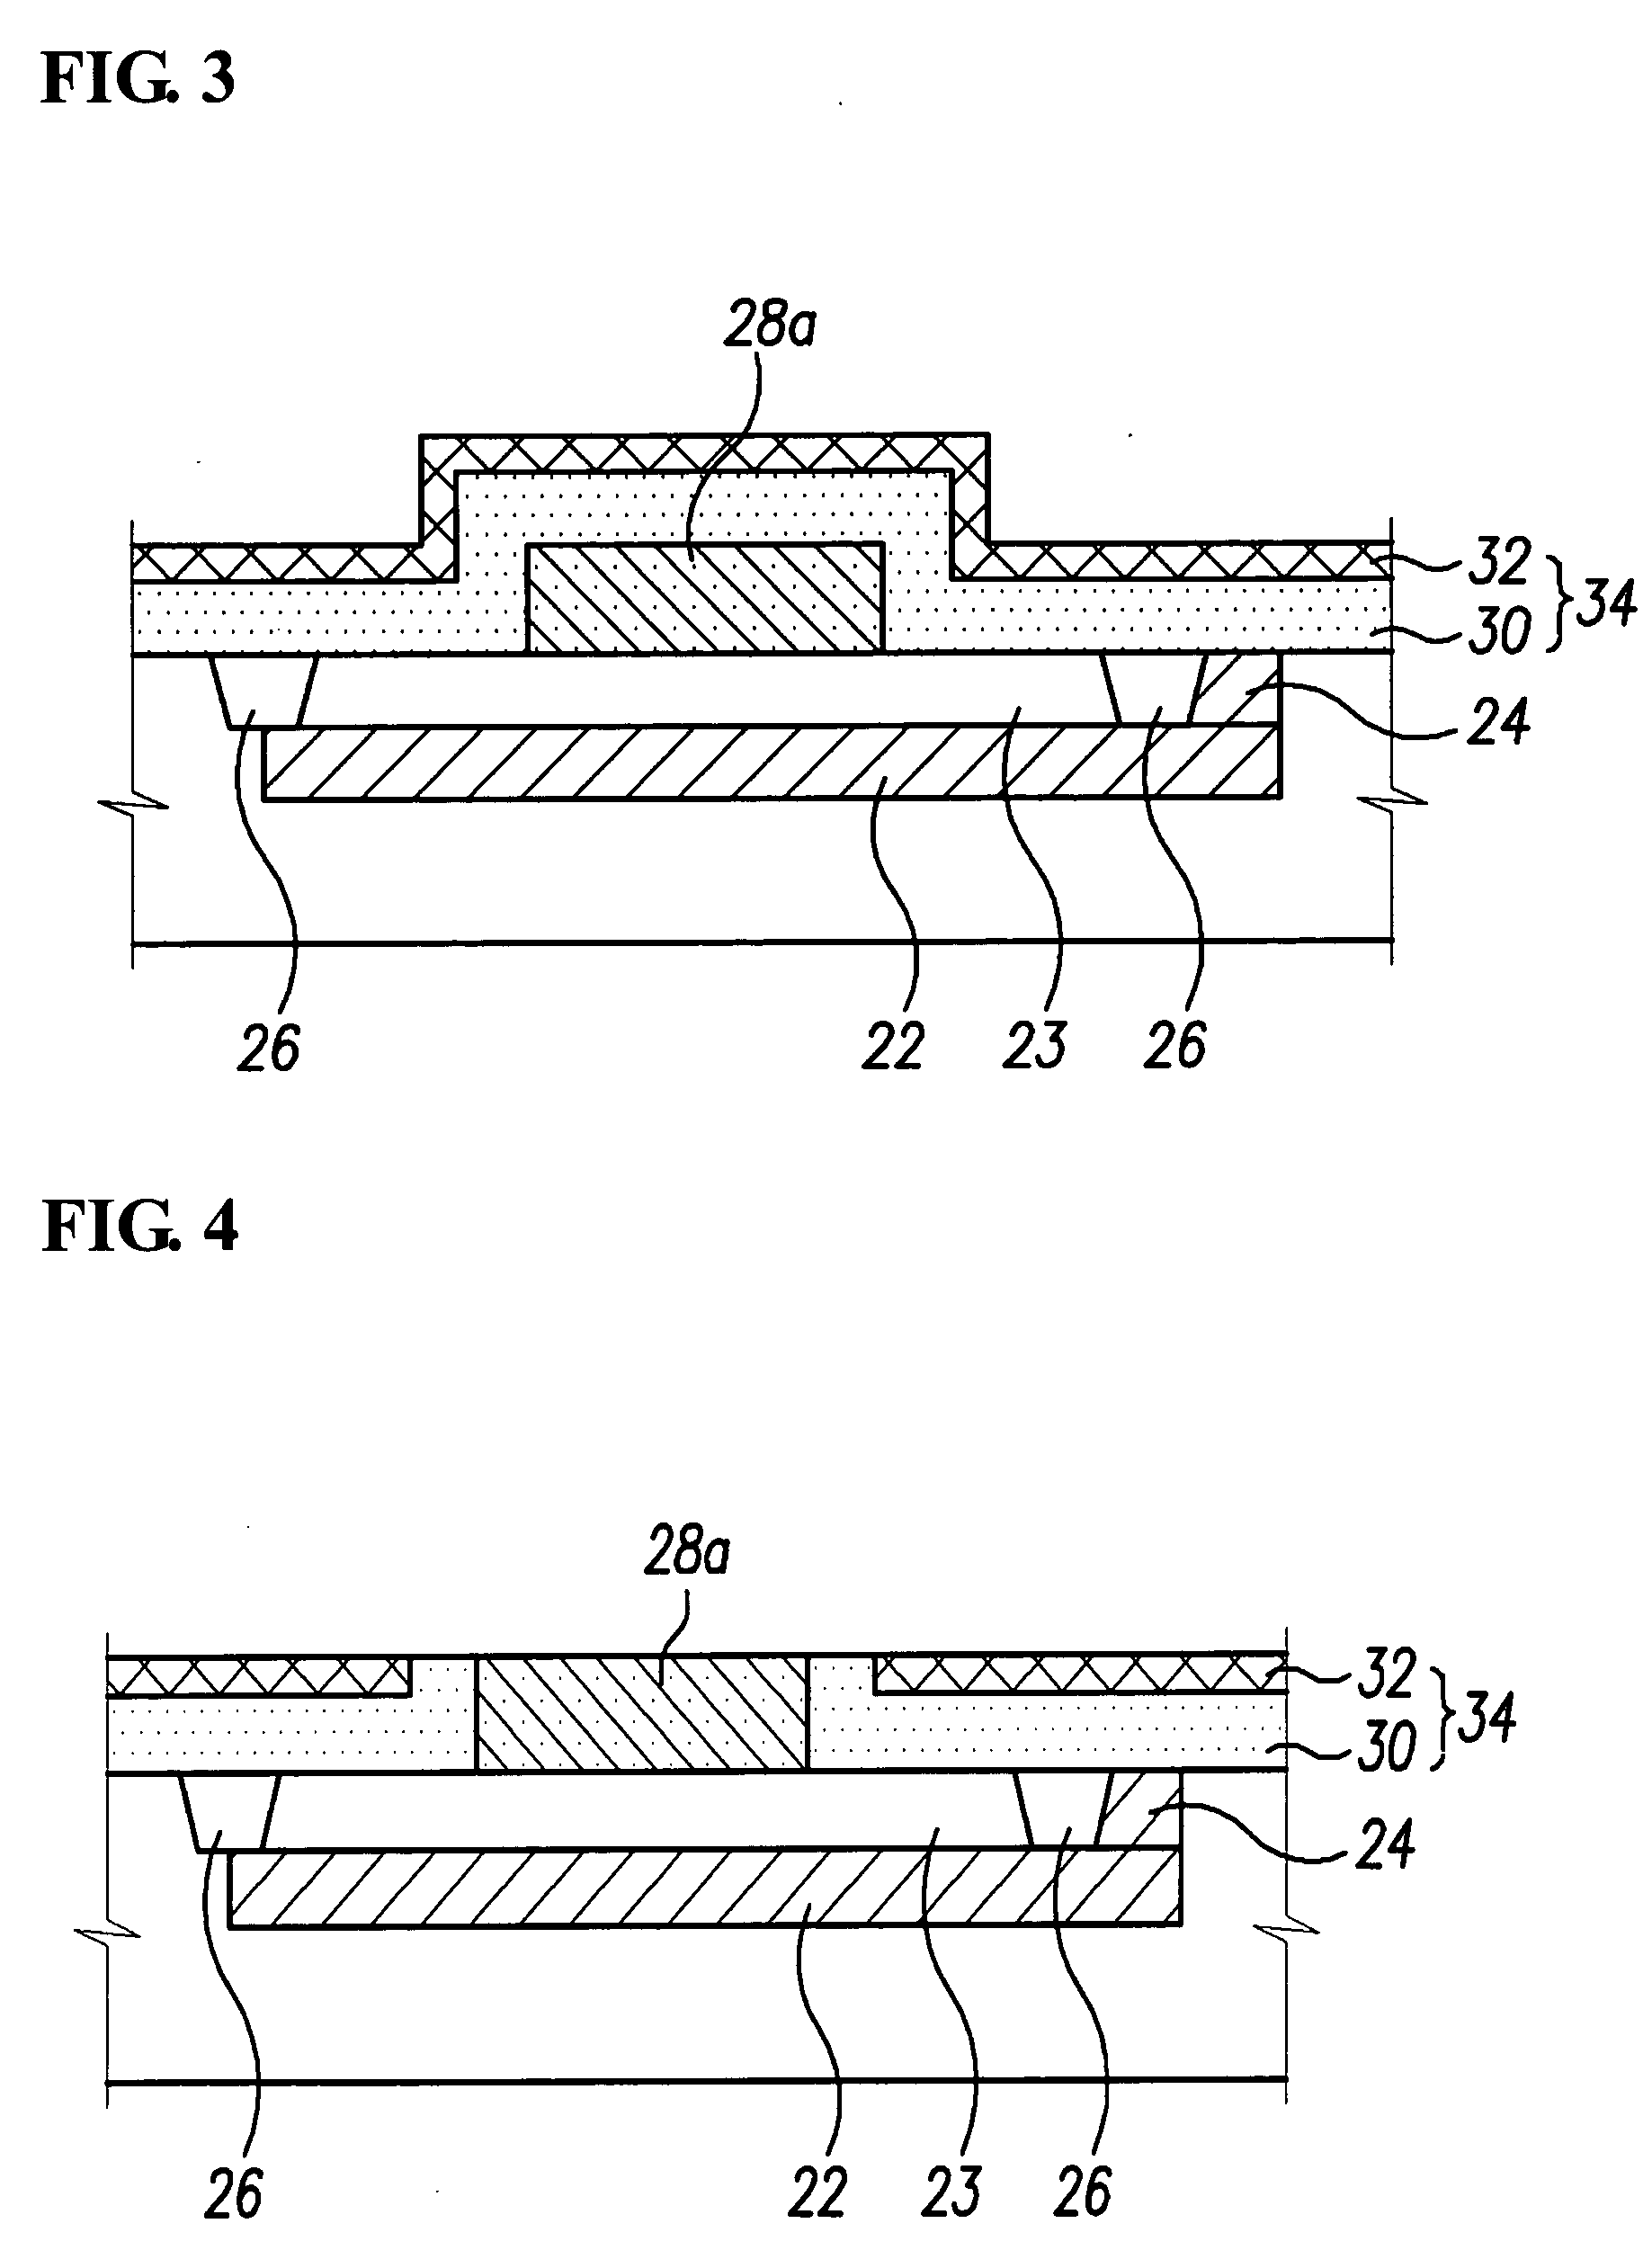 Self-aligned bipolar semiconductor device and fabrication method thereof